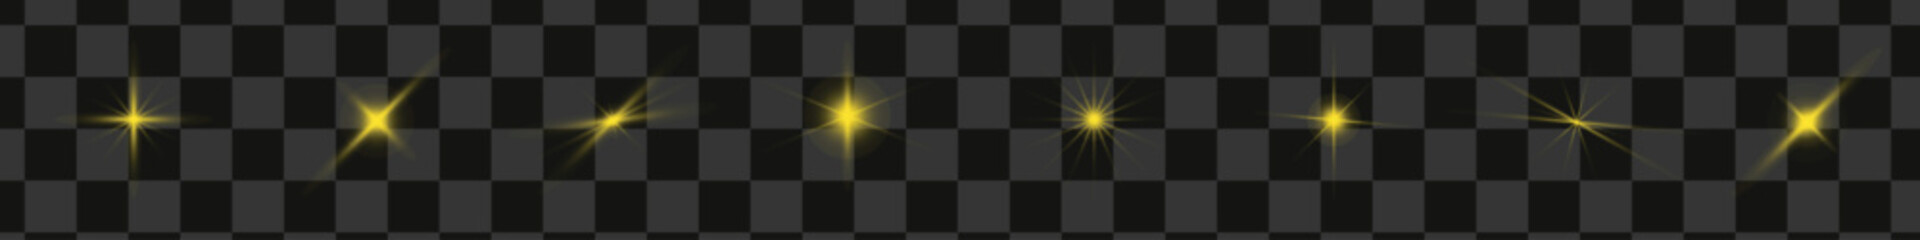 Twinkling stars. Sparkle star icons. Blink glitter and glowing icon. Collection of yellow stars